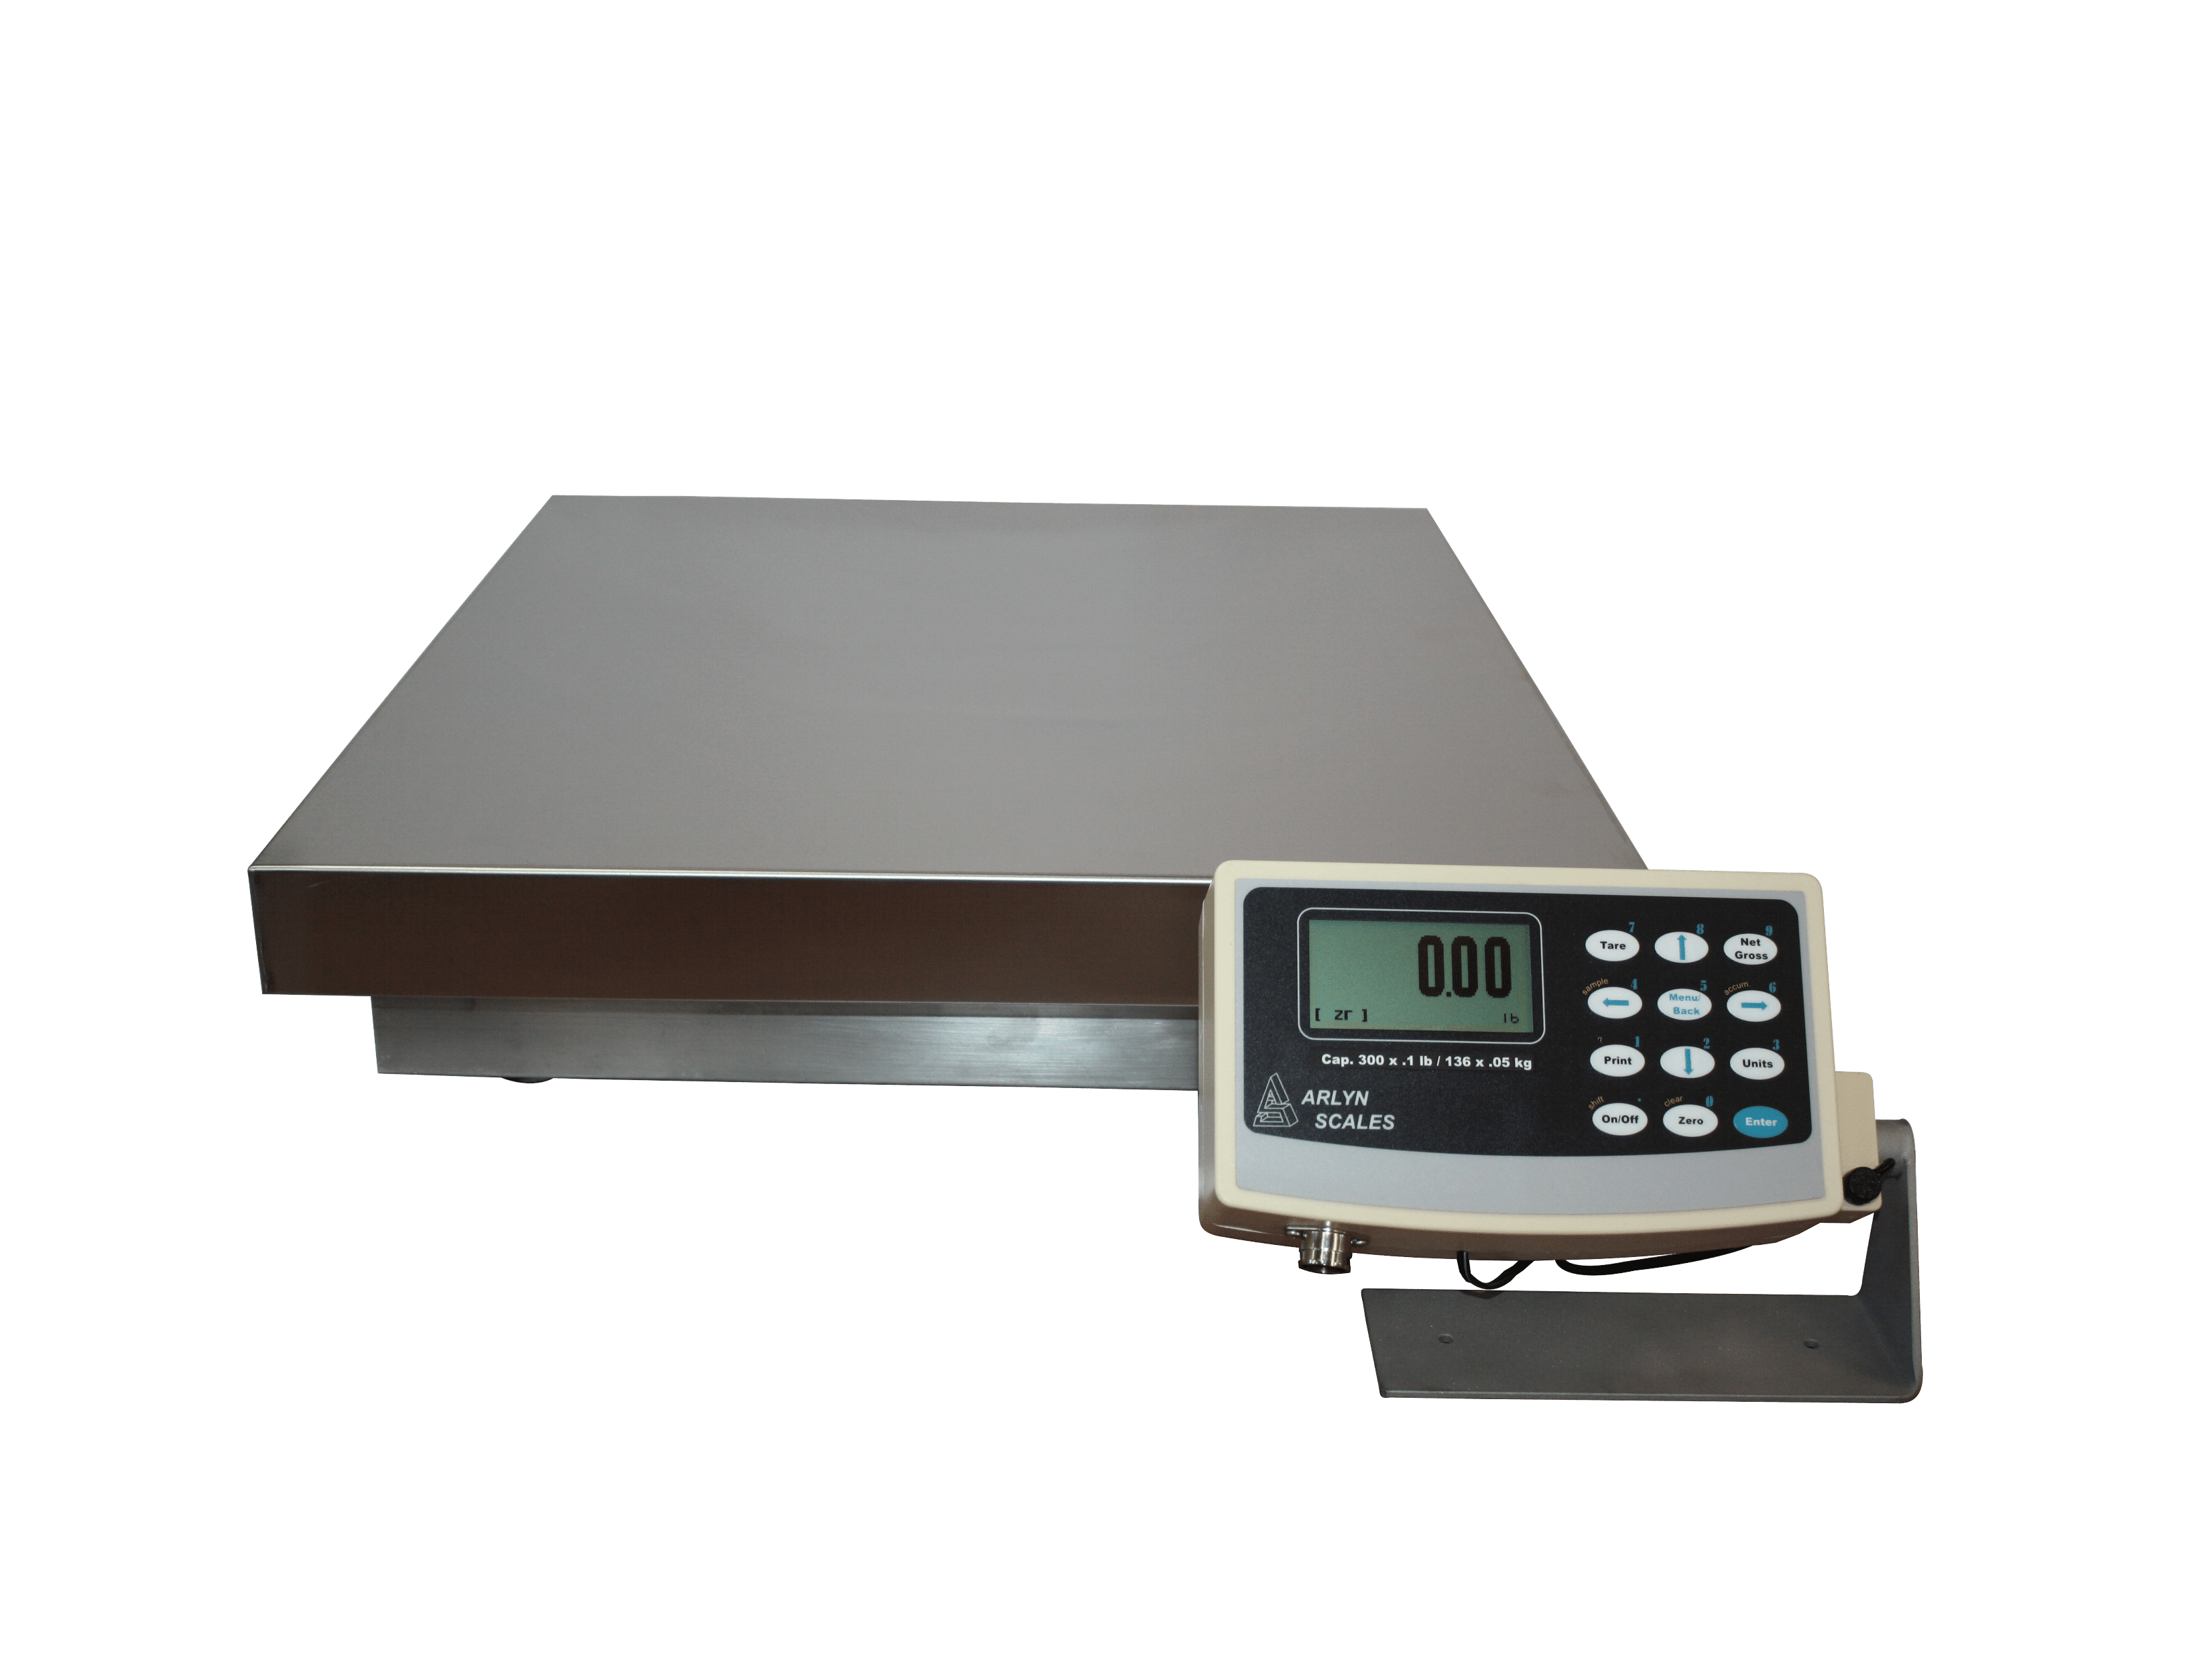 Digital Laundry Scale With Dual Display at Material Handling